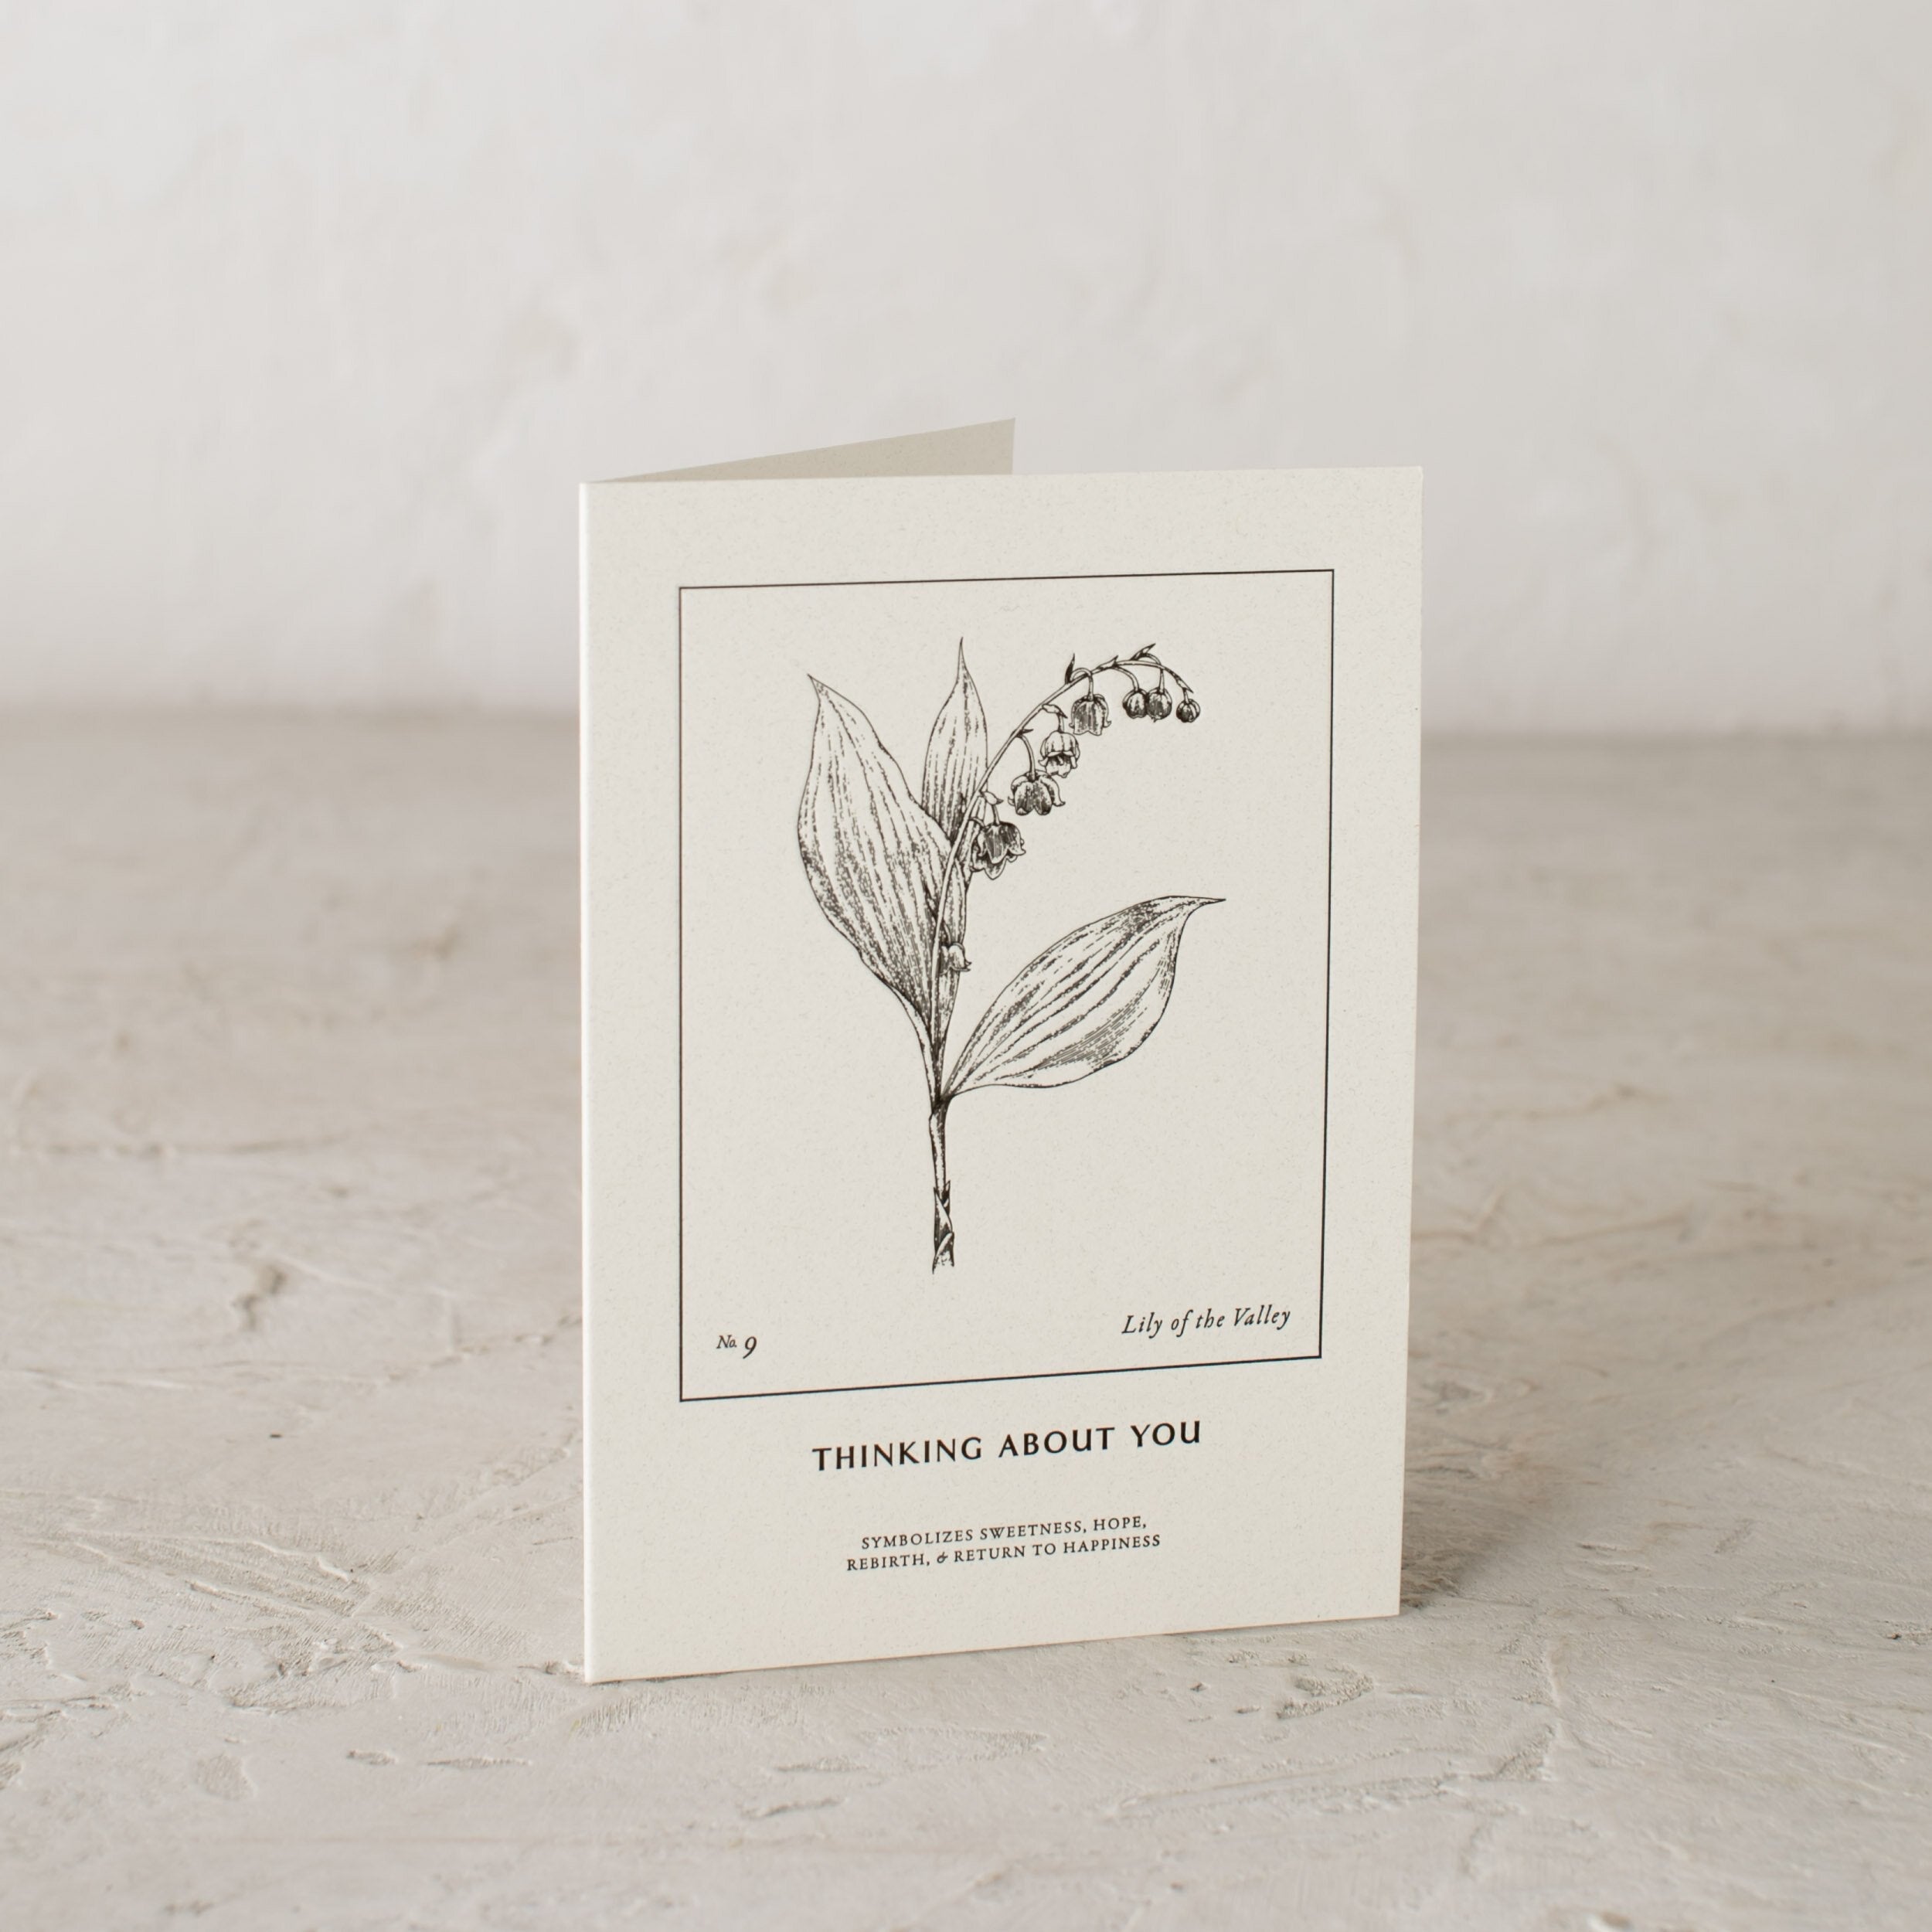 Letter pressed greeting card with a botanical illustrated Lily of the Valley, "Thinking About You" - Symbolizes sweetness, hope, rebirth and return to happiness." Designed and sold by Verdant, Kansas City.